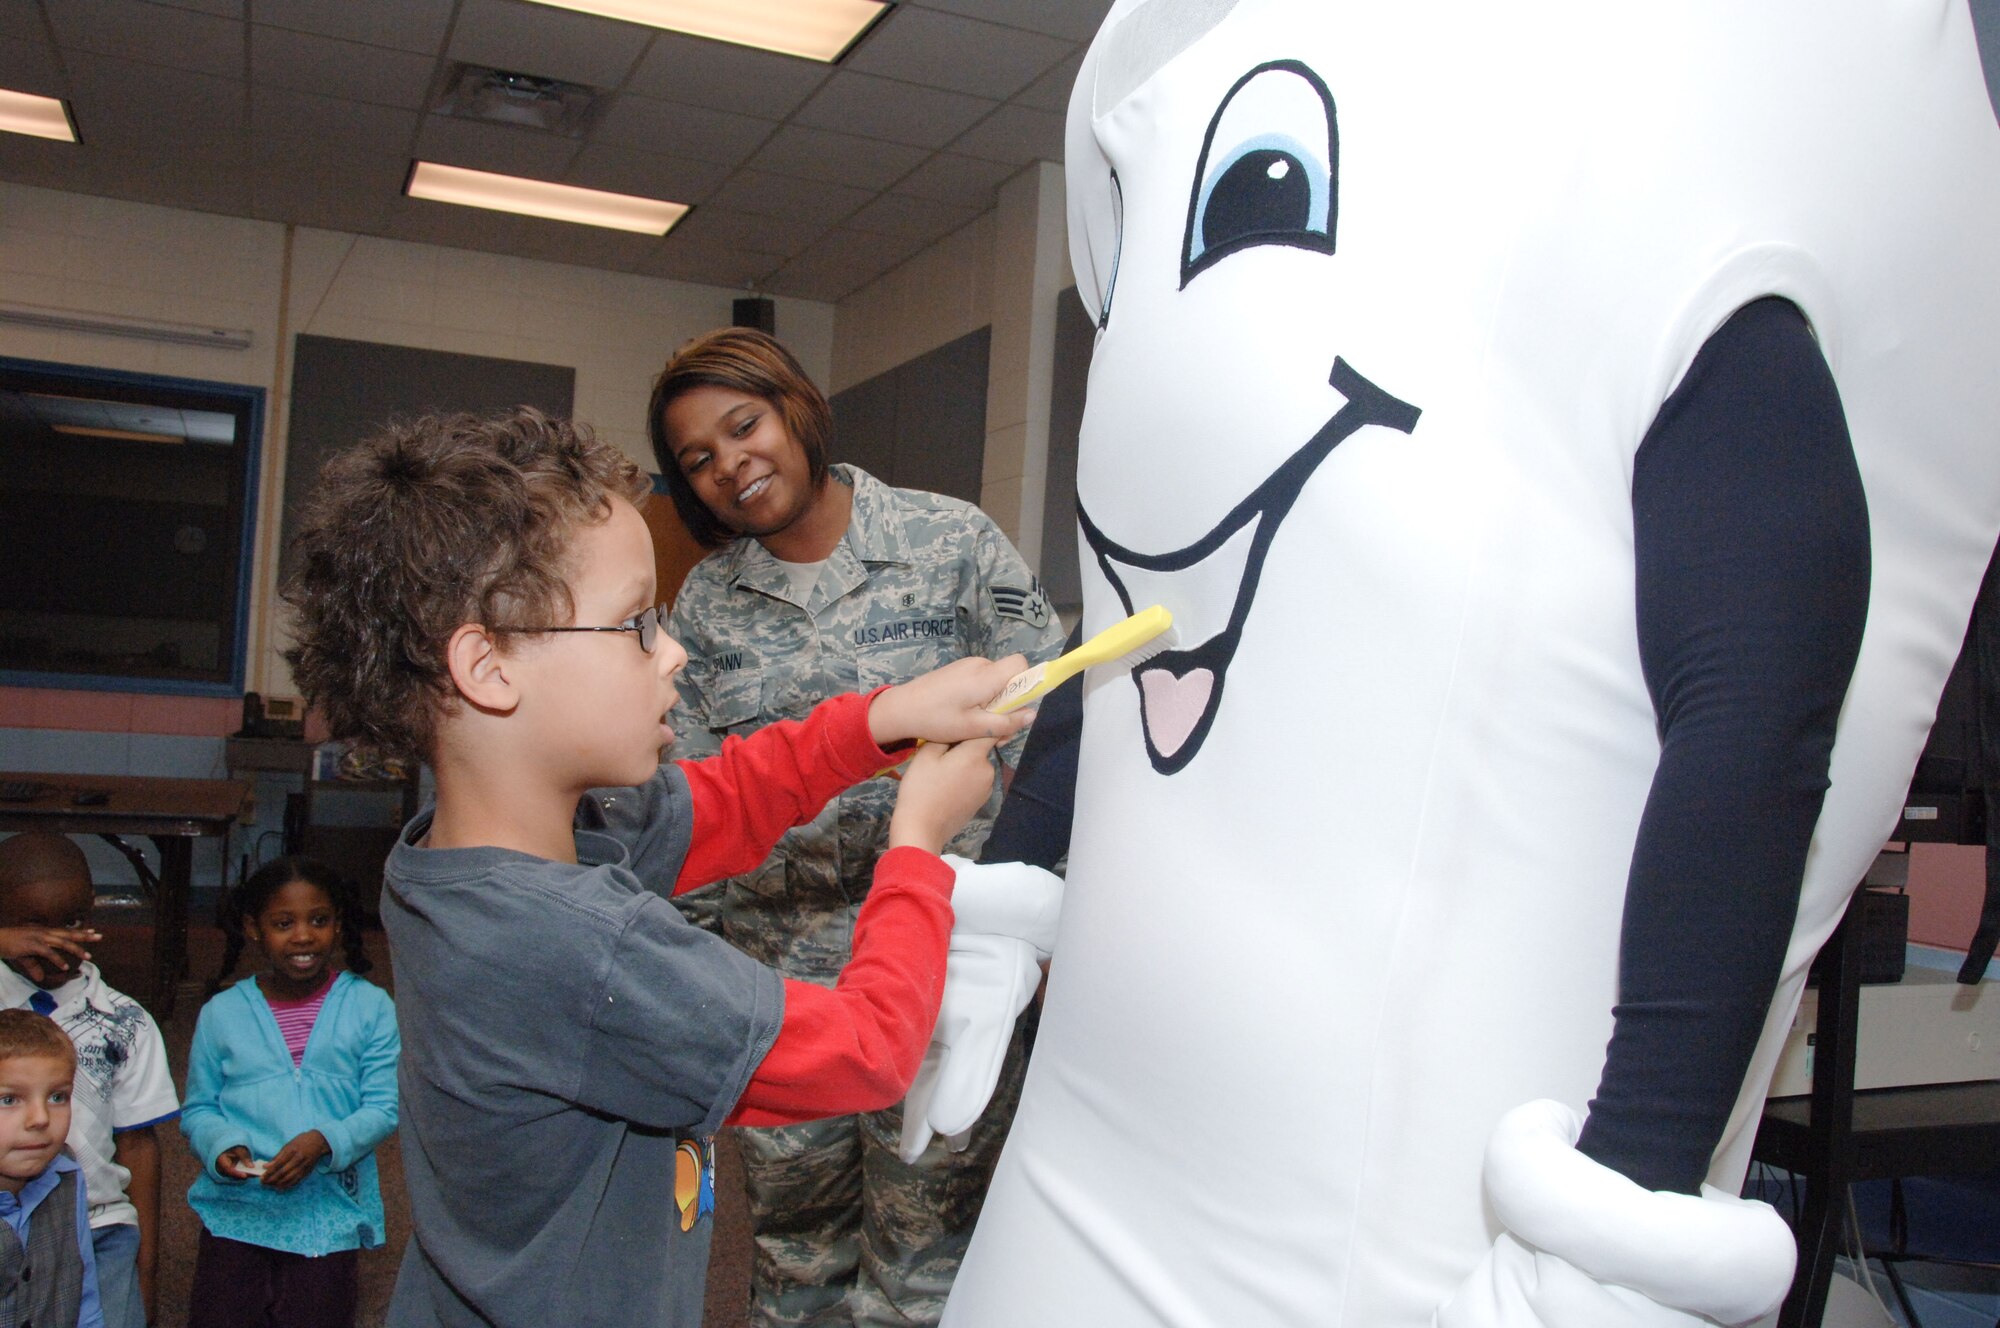 "Major Molar" and members of the Maxwell Dental Clinic paid a visit to Maxwell Elementary School on Feb. 24 as February's National Children's Dental Health Month came to a close. With the help of Major Molar, Jordan Glenn learns the correct way to brush as Senior Airman Jasmine Spann, a dental assistant at the clinic, observes.  Dental Clinic members visited the school over two days to talk about oral health care and distribute activity booklets. (Air Force photo by Melanie Rodgers Cox)